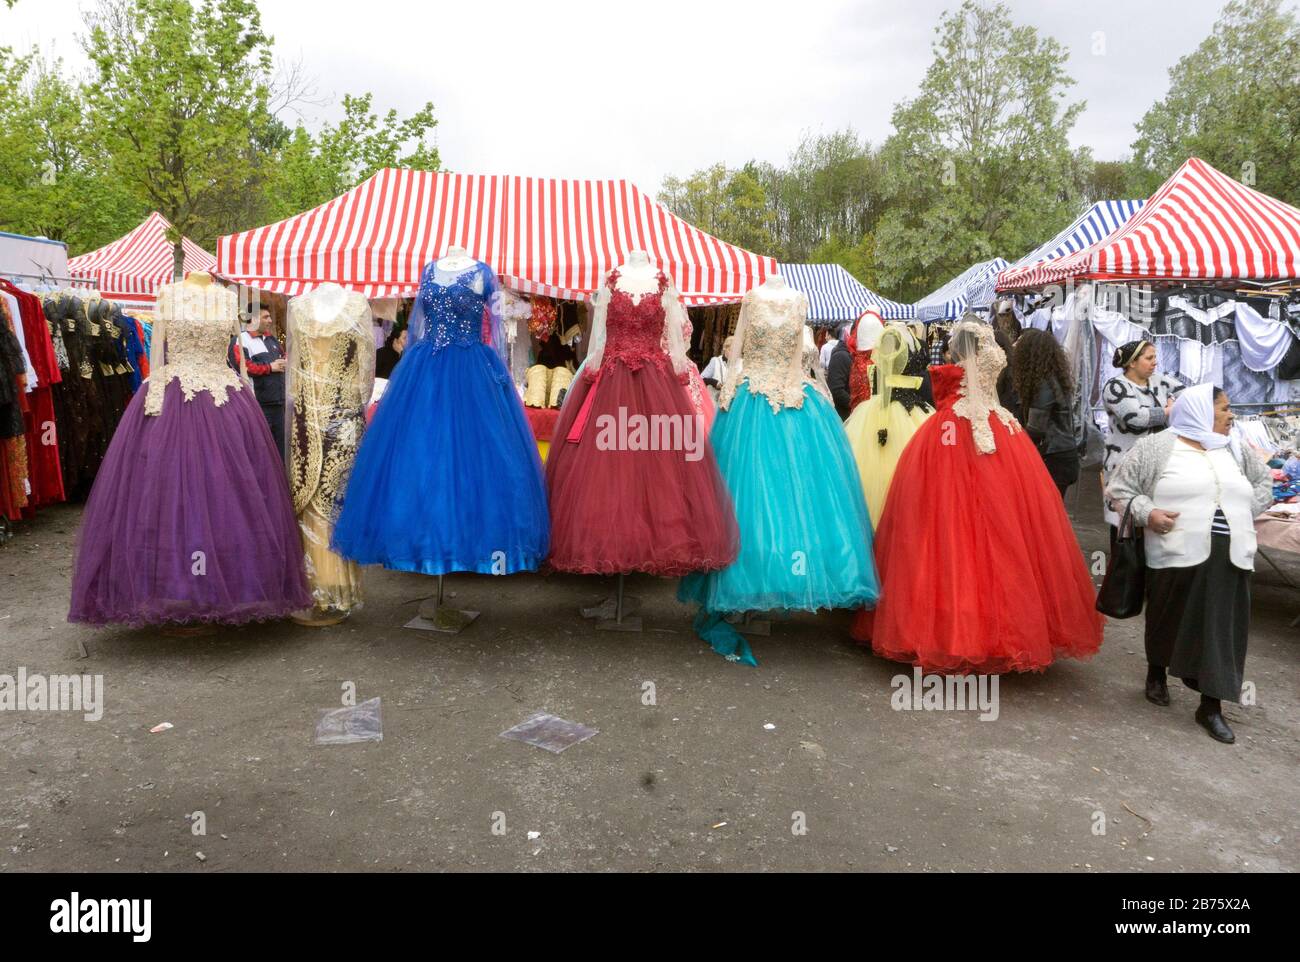 Stand with Turkish wedding dresses on a flea market in Gelsenkirchen, on 22.04.2017. With an unemployment rate of 14% (January 2017) and a foreigner share of almost 20%, the city of Gelsenkirchen is facing great social problems. [automated translation] Stock Photo